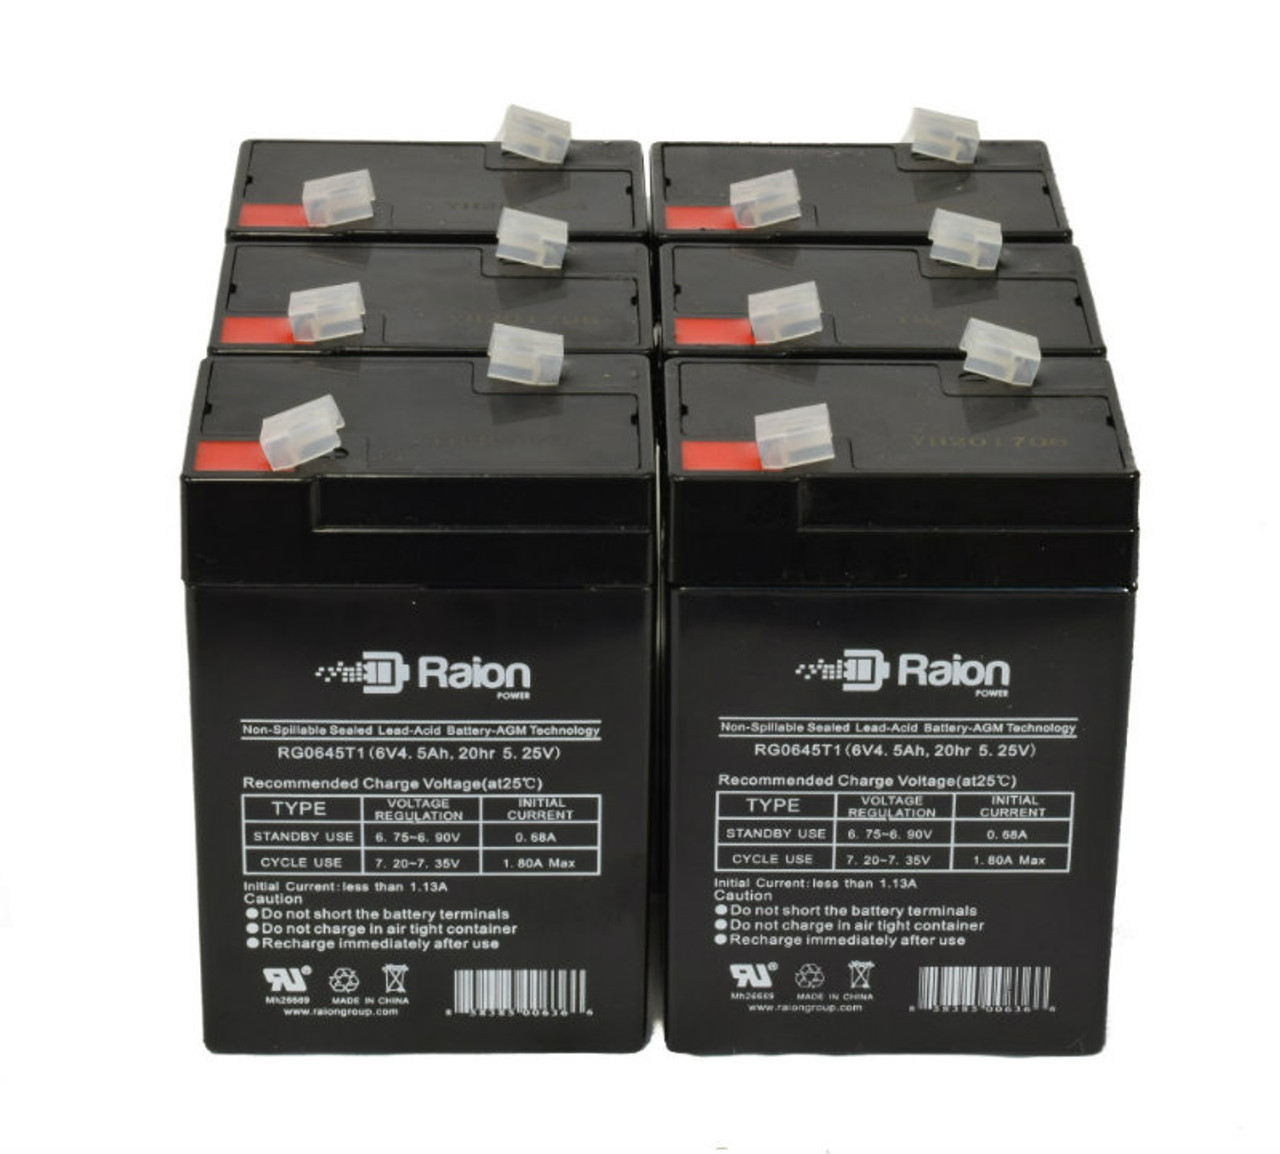 Raion Power 6V 4.5Ah Replacement Emergency Light Battery for National Power Corporation GS012PS - 6 Pack